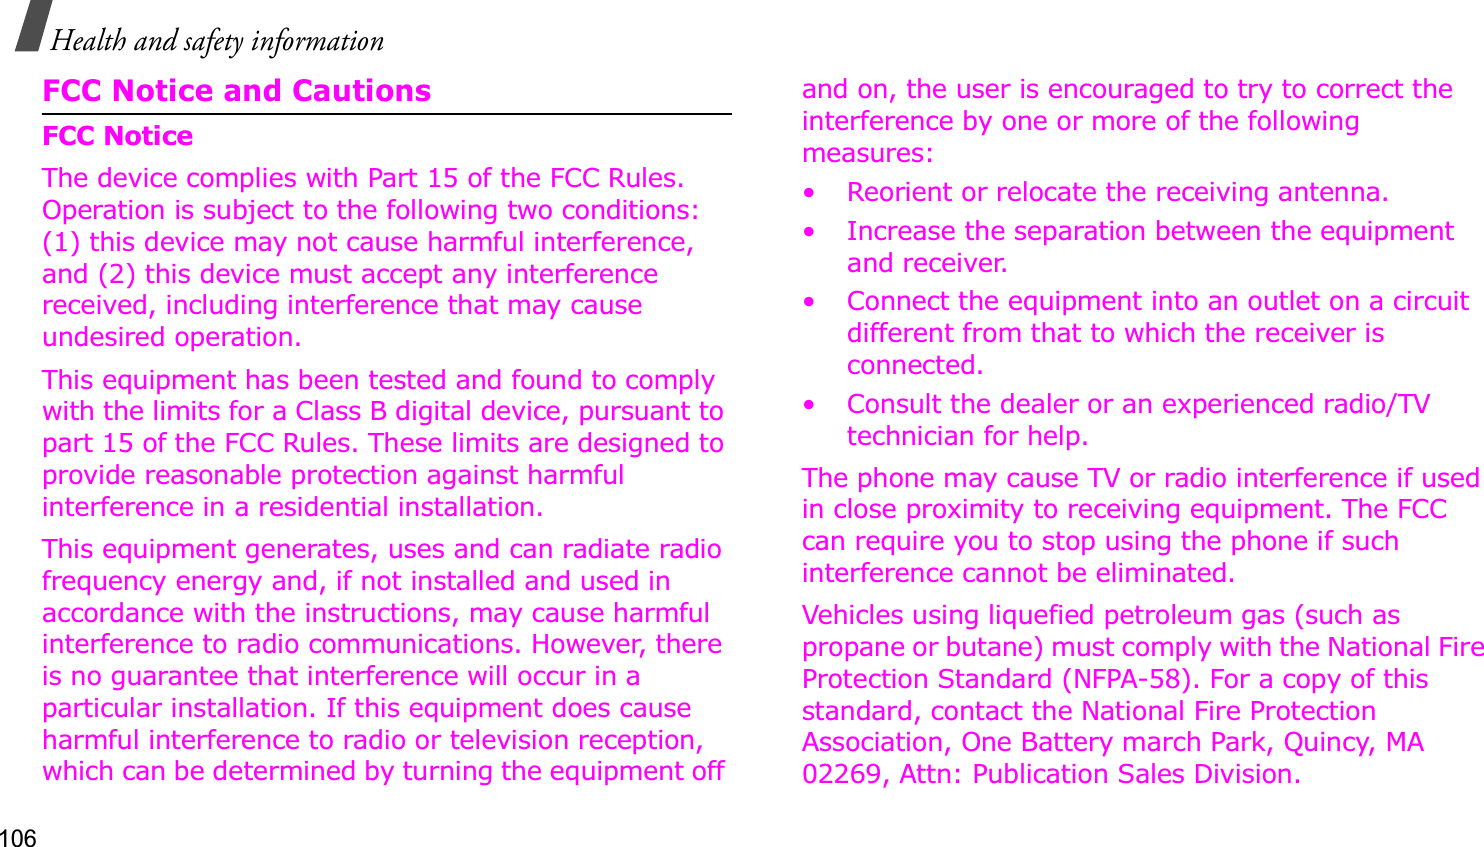 106Health and safety informationFCC Notice and CautionsFCC NoticeThe device complies with Part 15 of the FCC Rules. Operation is subject to the following two conditions: (1) this device may not cause harmful interference, and (2) this device must accept any interference received, including interference that may cause undesired operation.This equipment has been tested and found to comply with the limits for a Class B digital device, pursuant to part 15 of the FCC Rules. These limits are designed to provide reasonable protection against harmful interference in a residential installation. This equipment generates, uses and can radiate radio frequency energy and, if not installed and used in accordance with the instructions, may cause harmful interference to radio communications. However, there is no guarantee that interference will occur in a particular installation. If this equipment does cause harmful interference to radio or television reception, which can be determined by turning the equipment off and on, the user is encouraged to try to correct the interference by one or more of the following measures:• Reorient or relocate the receiving antenna.• Increase the separation between the equipment and receiver.• Connect the equipment into an outlet on a circuit different from that to which the receiver is connected.• Consult the dealer or an experienced radio/TV technician for help.The phone may cause TV or radio interference if used in close proximity to receiving equipment. The FCC can require you to stop using the phone if such interference cannot be eliminated.Vehicles using liquefied petroleum gas (such as propane or butane) must comply with the National Fire Protection Standard (NFPA-58). For a copy of this standard, contact the National Fire Protection Association, One Battery march Park, Quincy, MA 02269, Attn: Publication Sales Division.